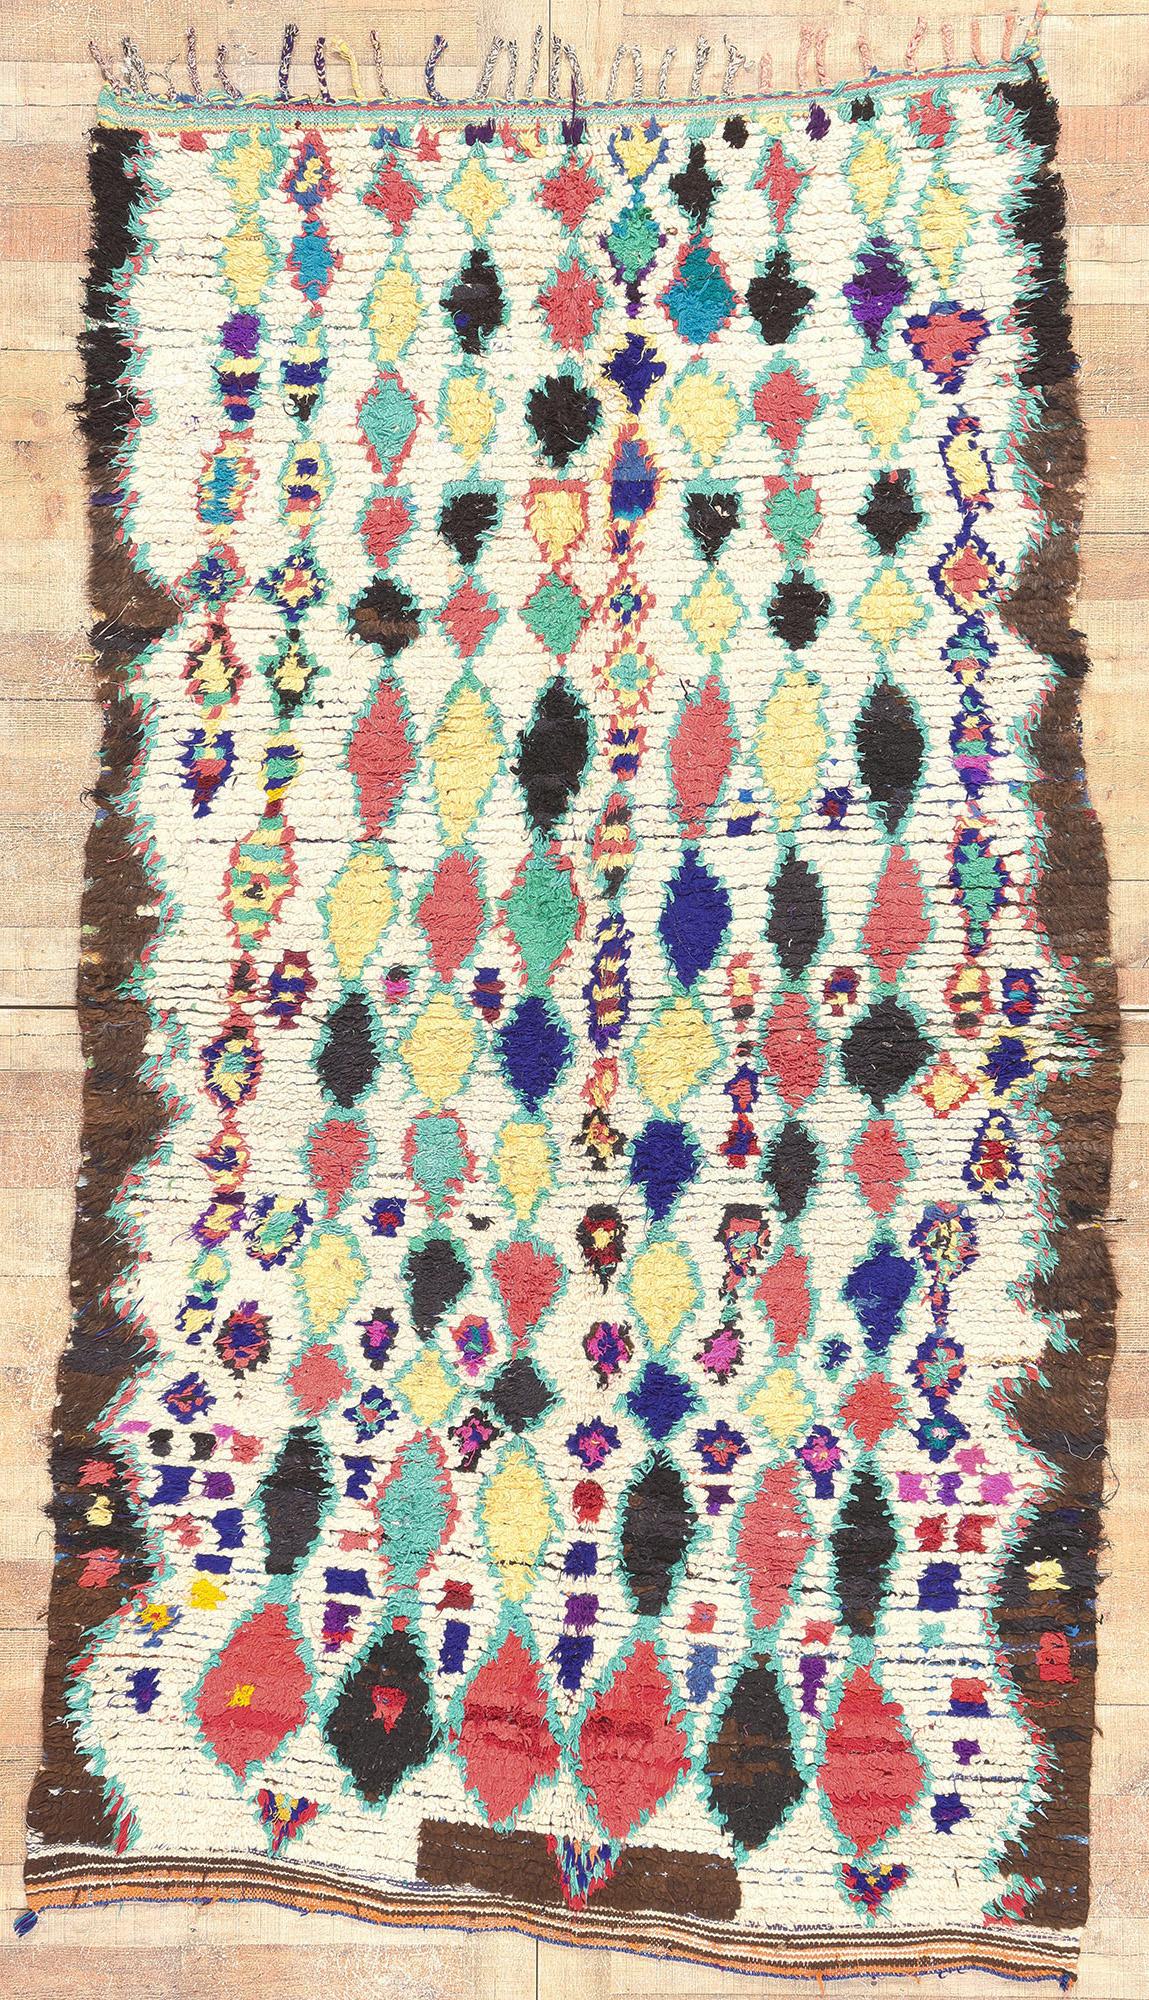 Vintage Boucherouite Moroccan Azilal Rag Rug by Berber Tribes of Morocco For Sale 2